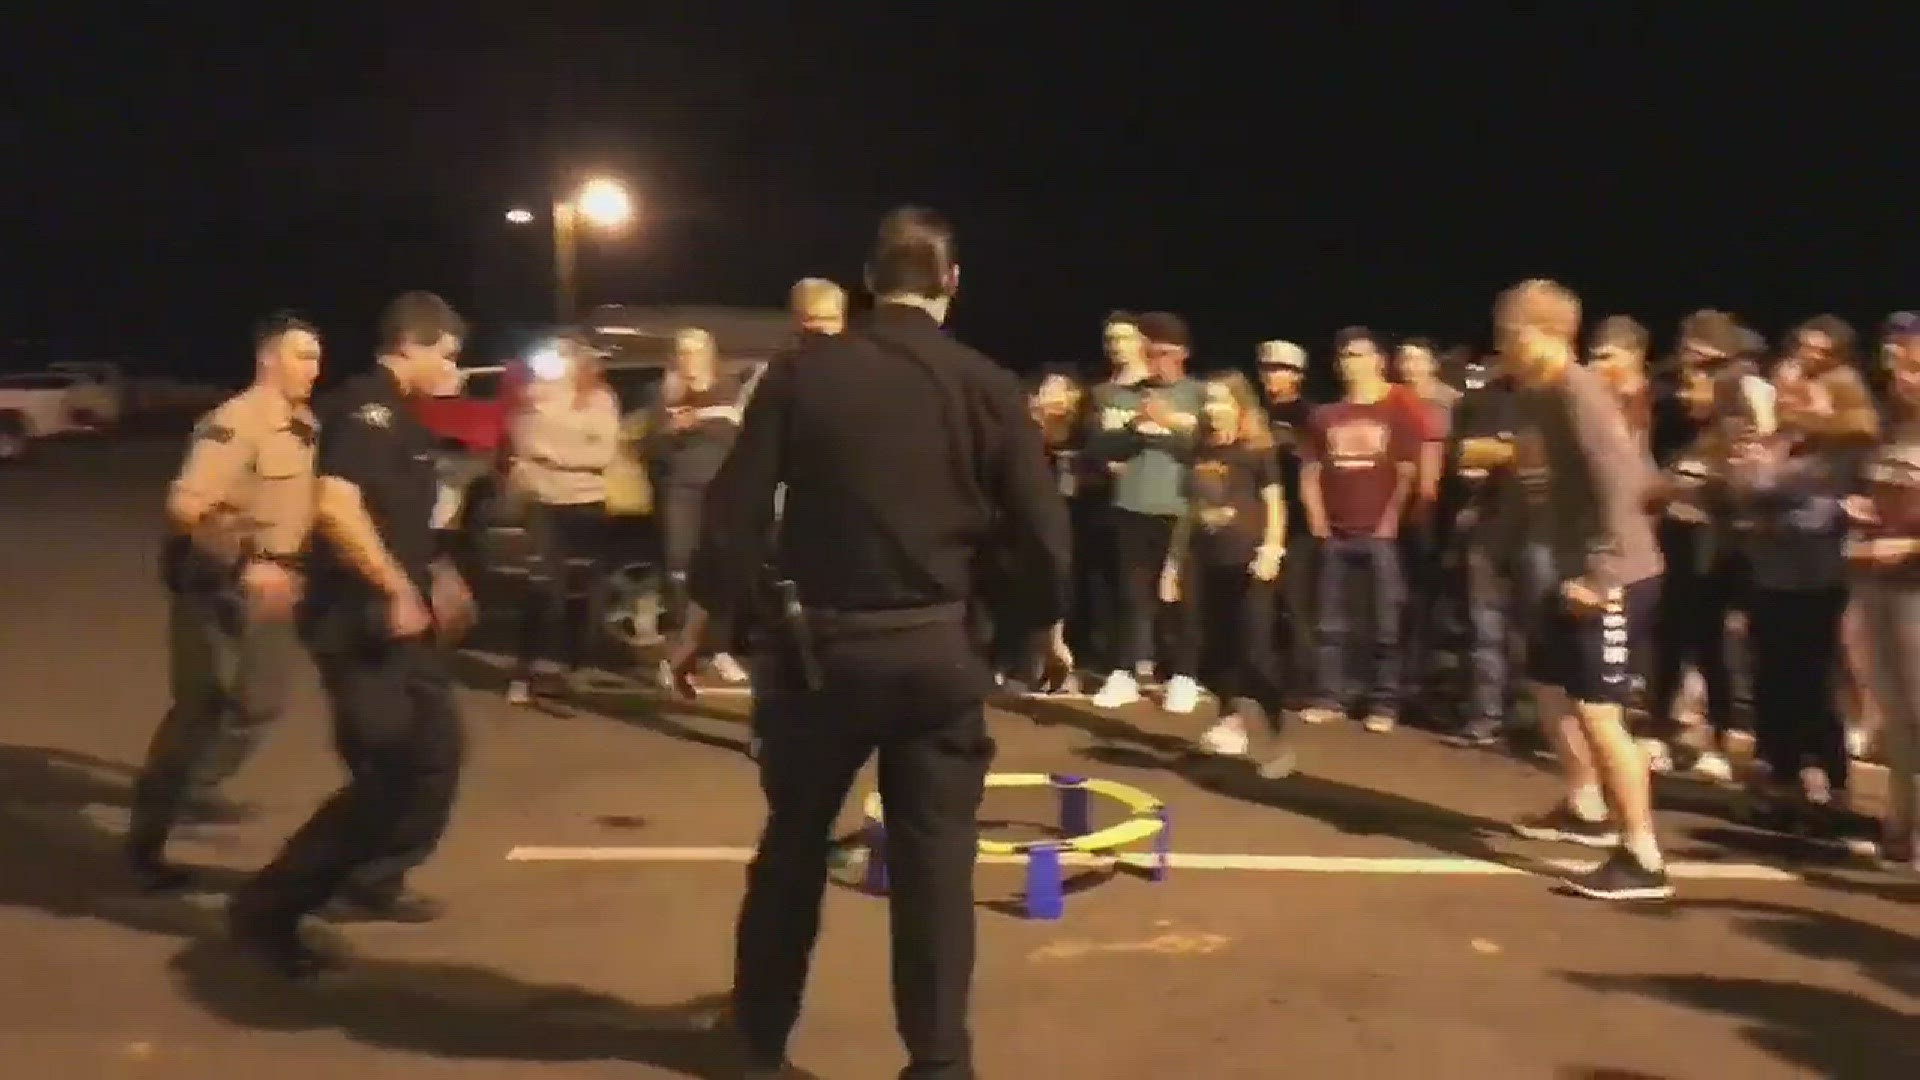 Police responded to complaints of a loud party in a parking lot, but when they arrived, they found Walla Walla high school students playing Spikeball. Naturally, they decided to join in on the fun.